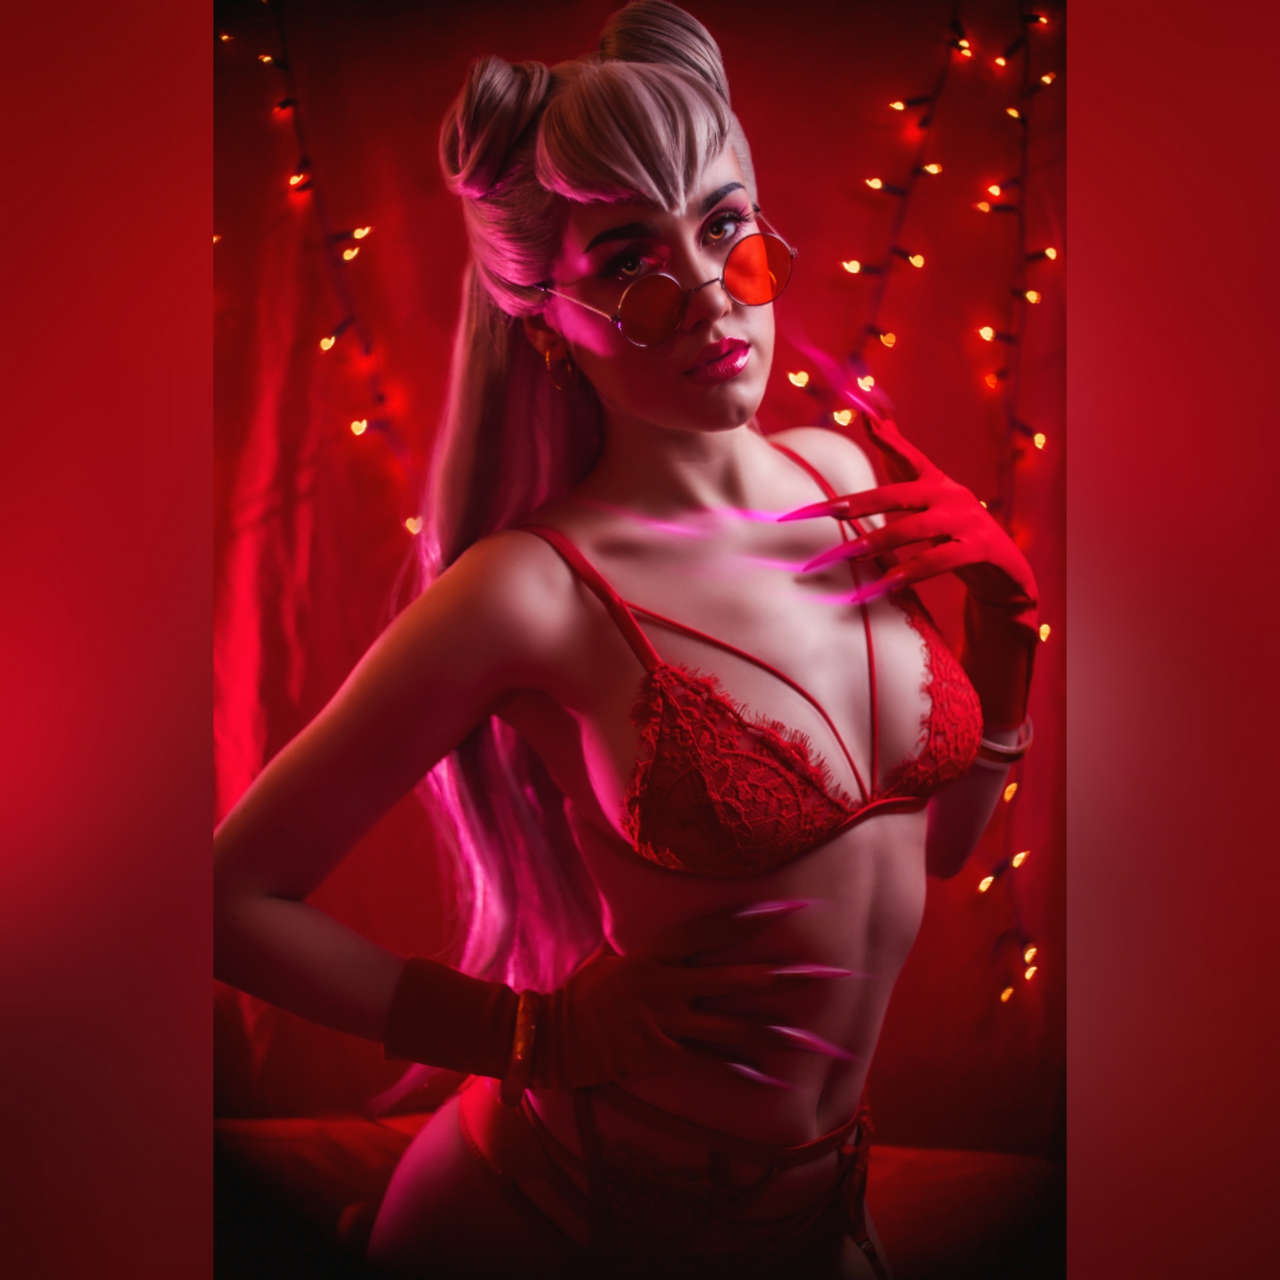 Self Evelynn Concept From Lol By Nephraa